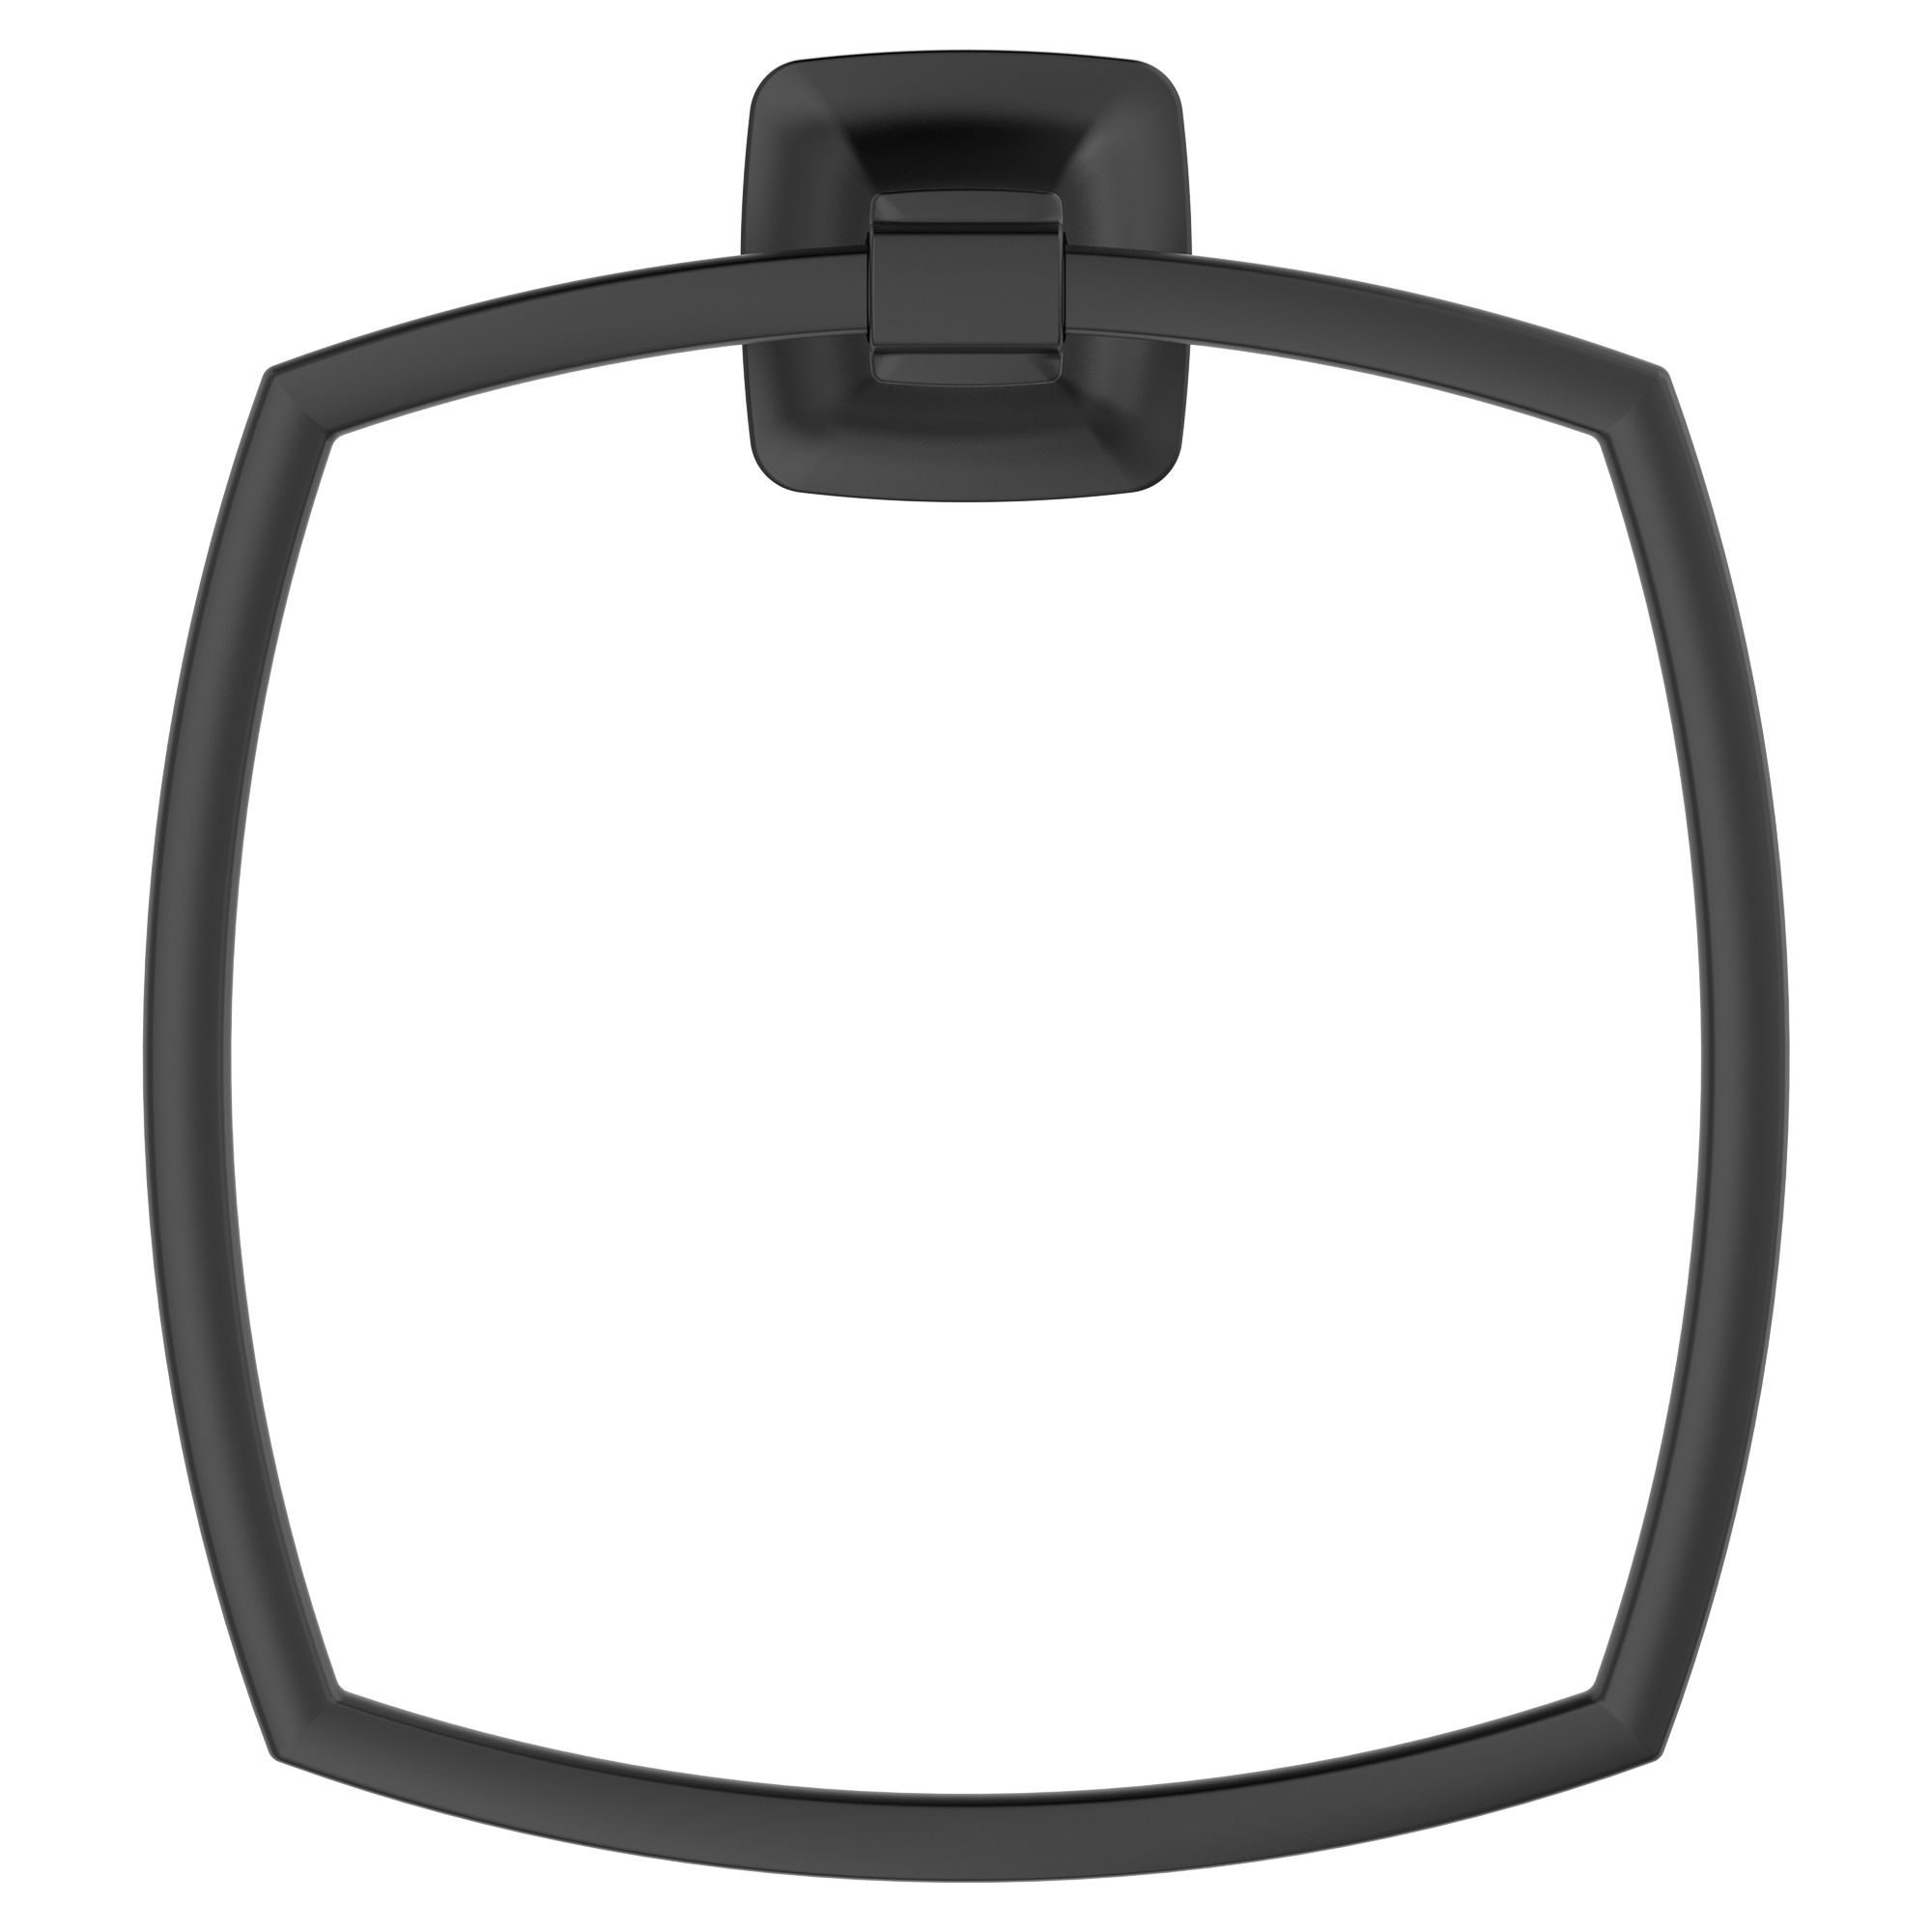 Townsend® Towel Ring